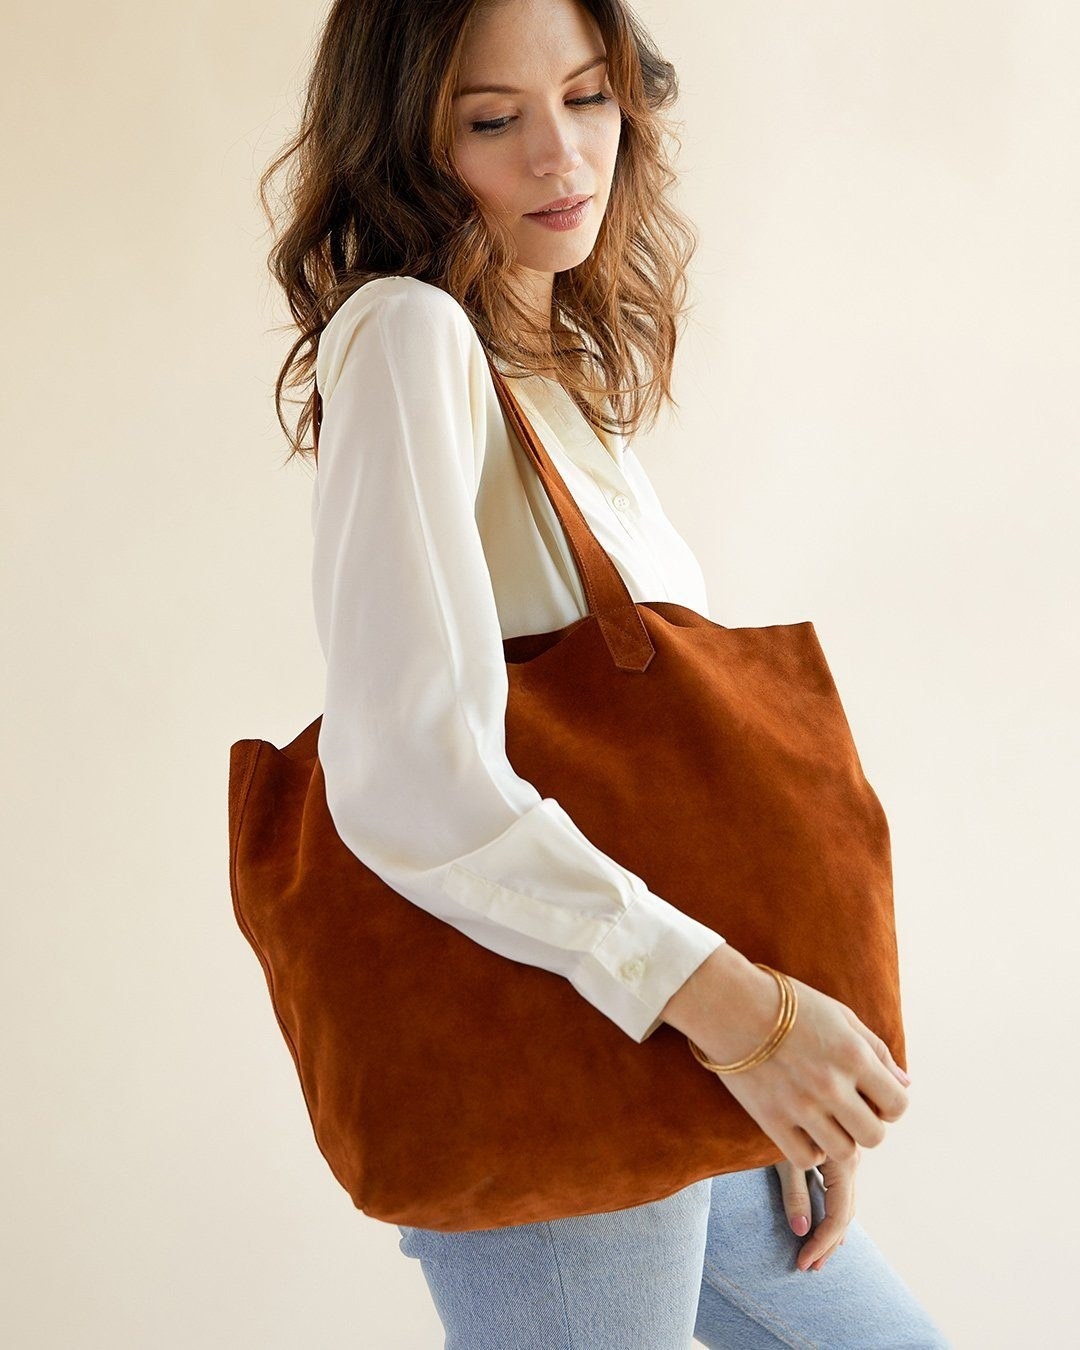 A model carrying a brown suede tote